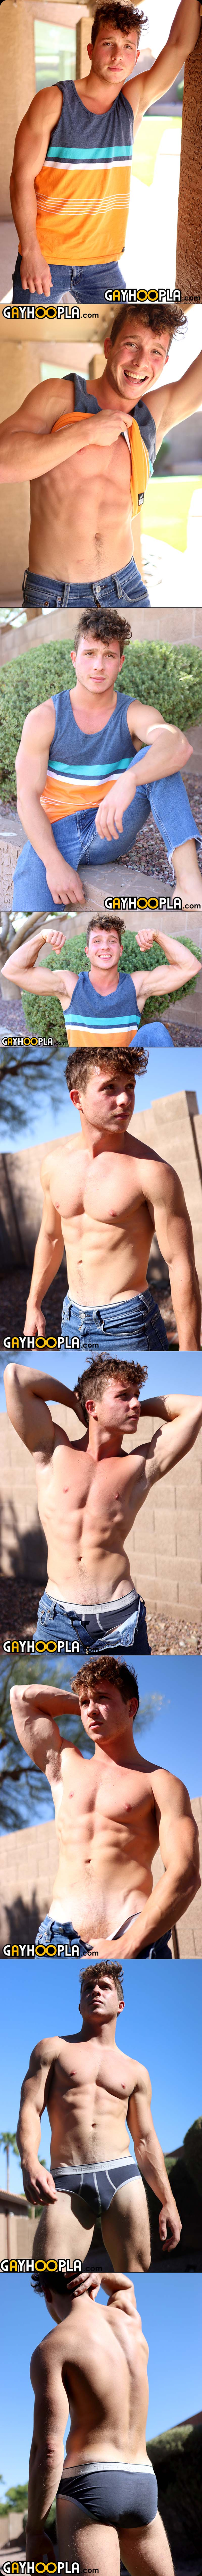 Lukas Cannon at GayHoopla